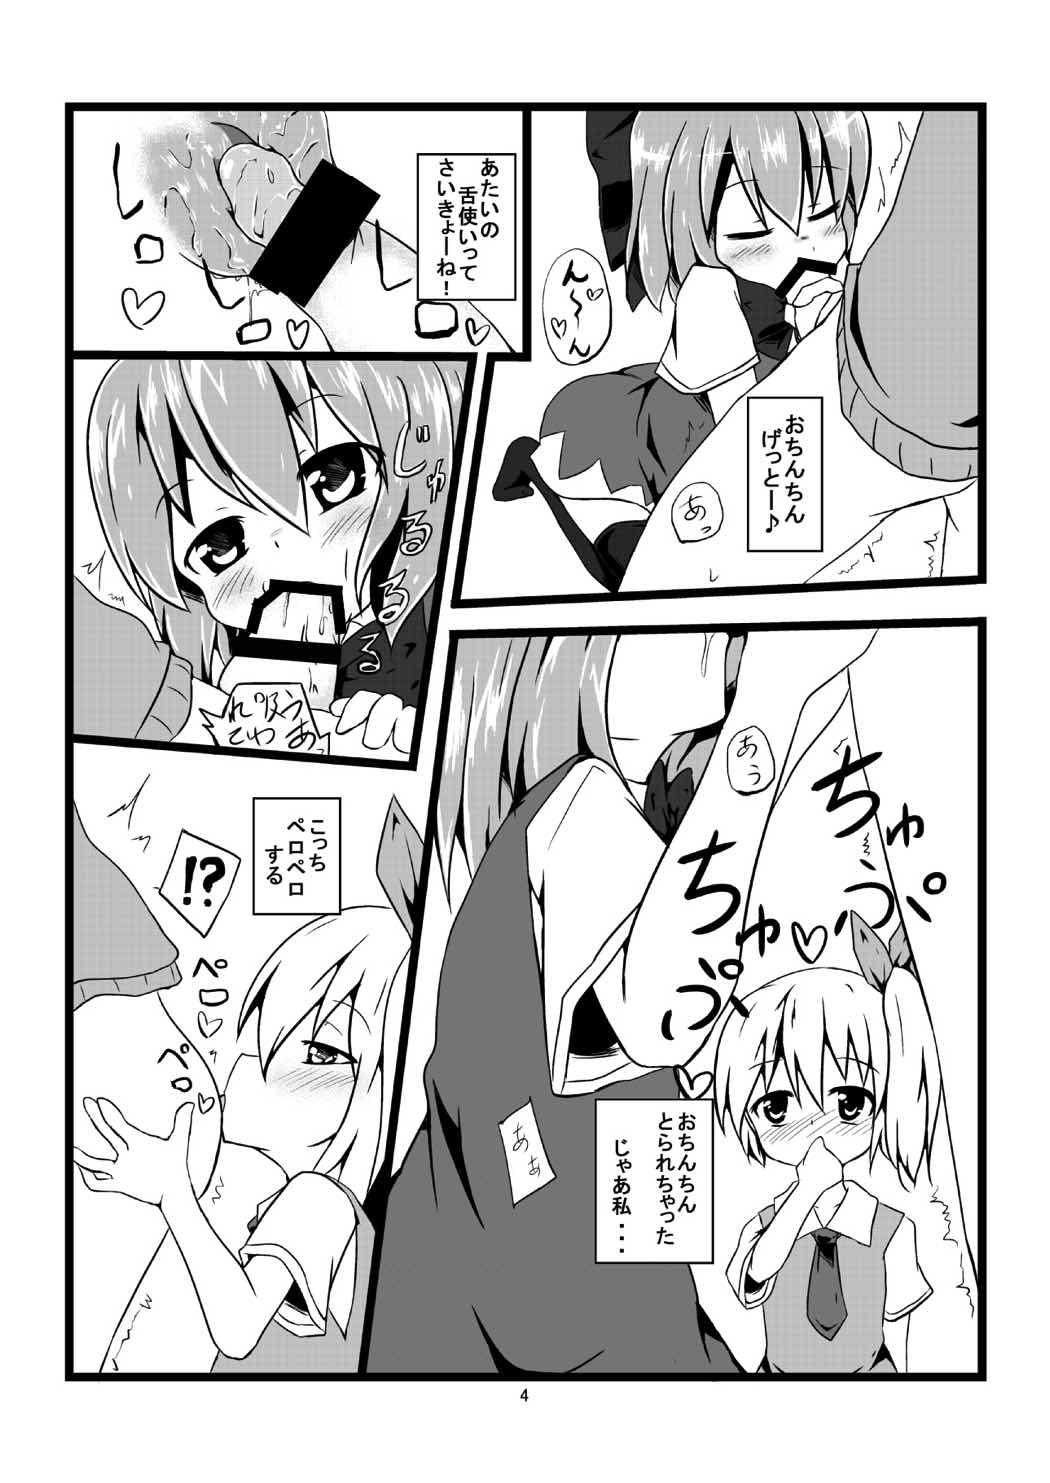 Doggy Style Porn Youseiten - Touhou project College - Page 5